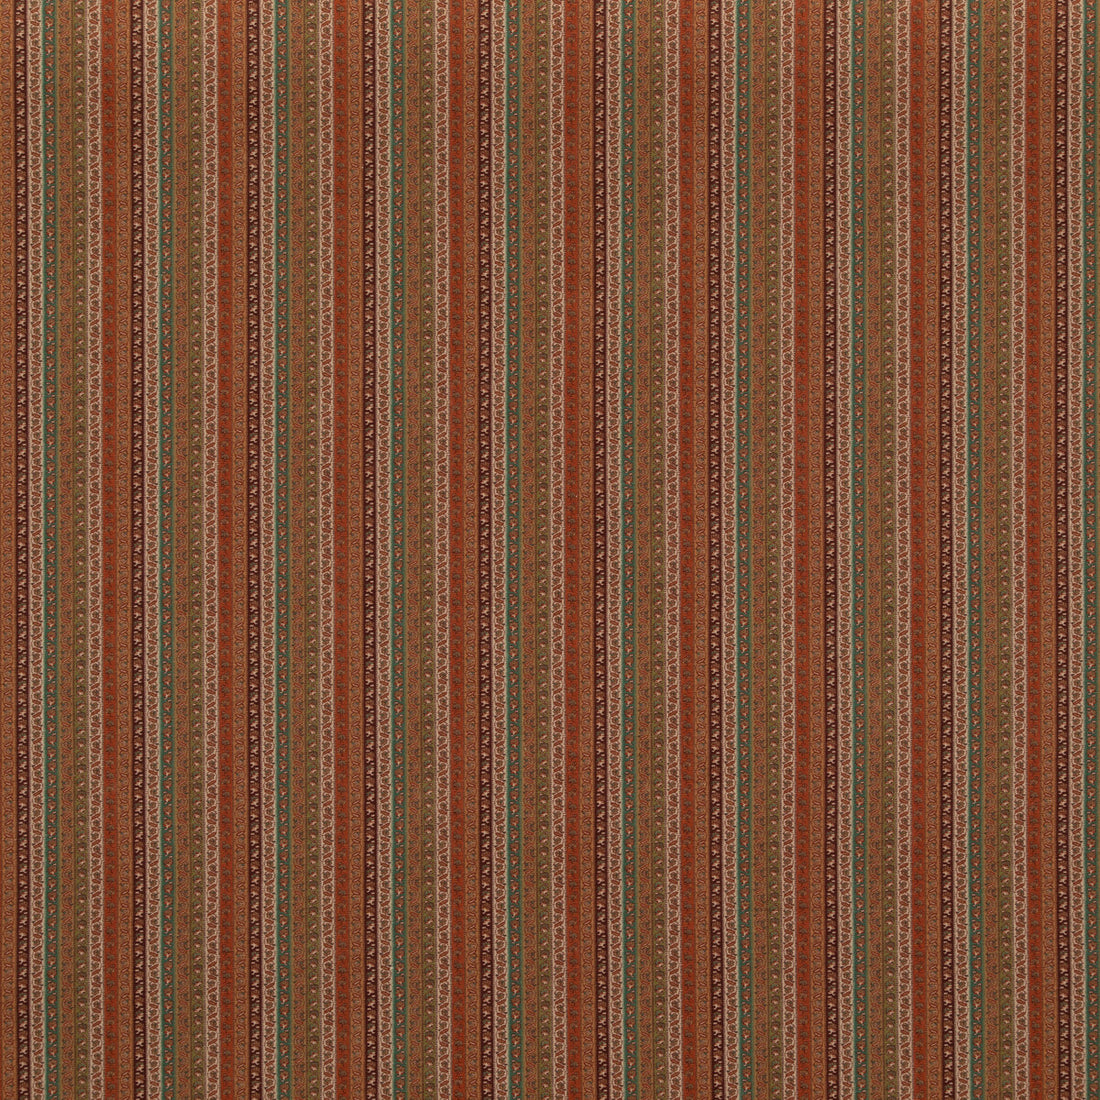 Wilde Stripe fabric in spice color - pattern FD2007.T30.0 - by Mulberry in the Mulberry Long Weekend collection